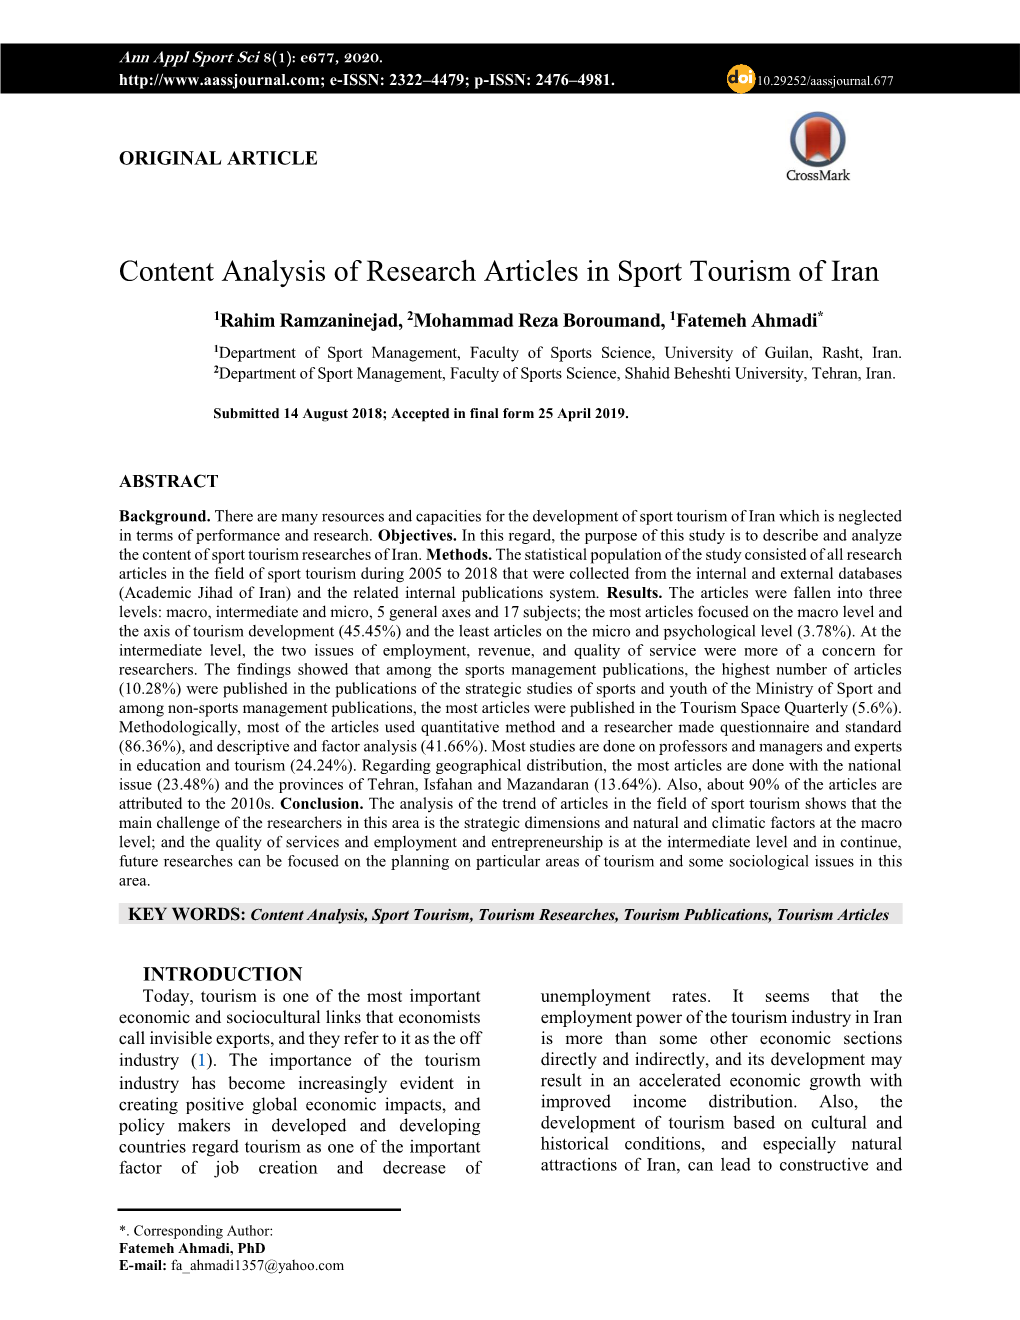 Content Analysis of Research Articles in Sport Tourism of Iran